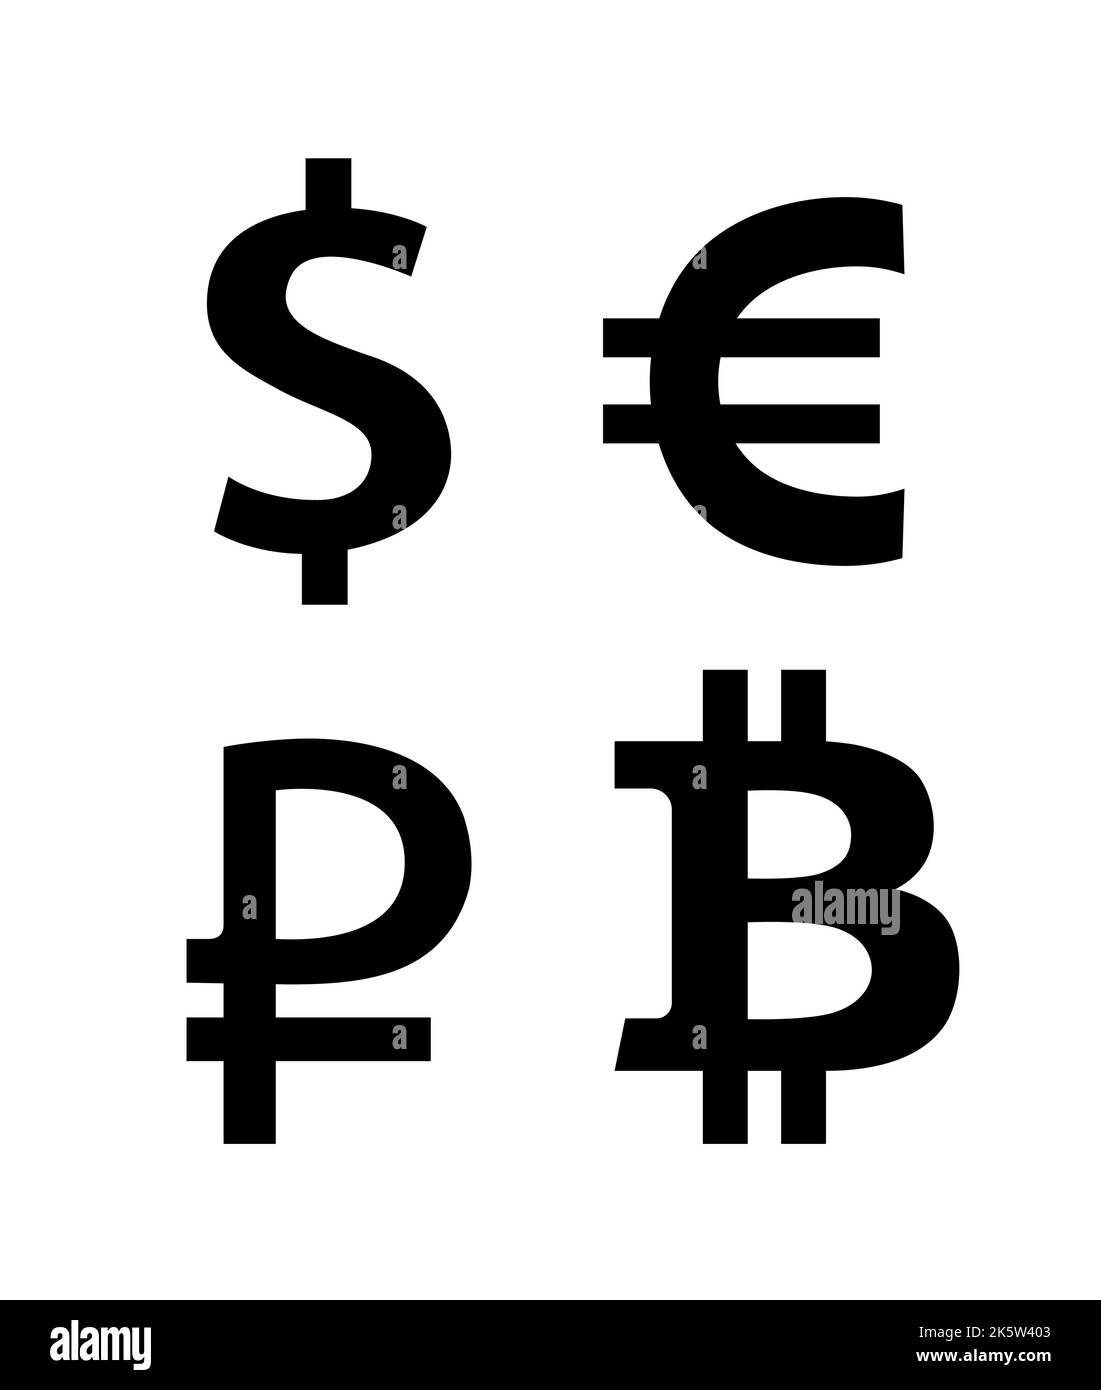 Set of currency symbols - Vector flat icons in black color isolated on white background. Stock Vector